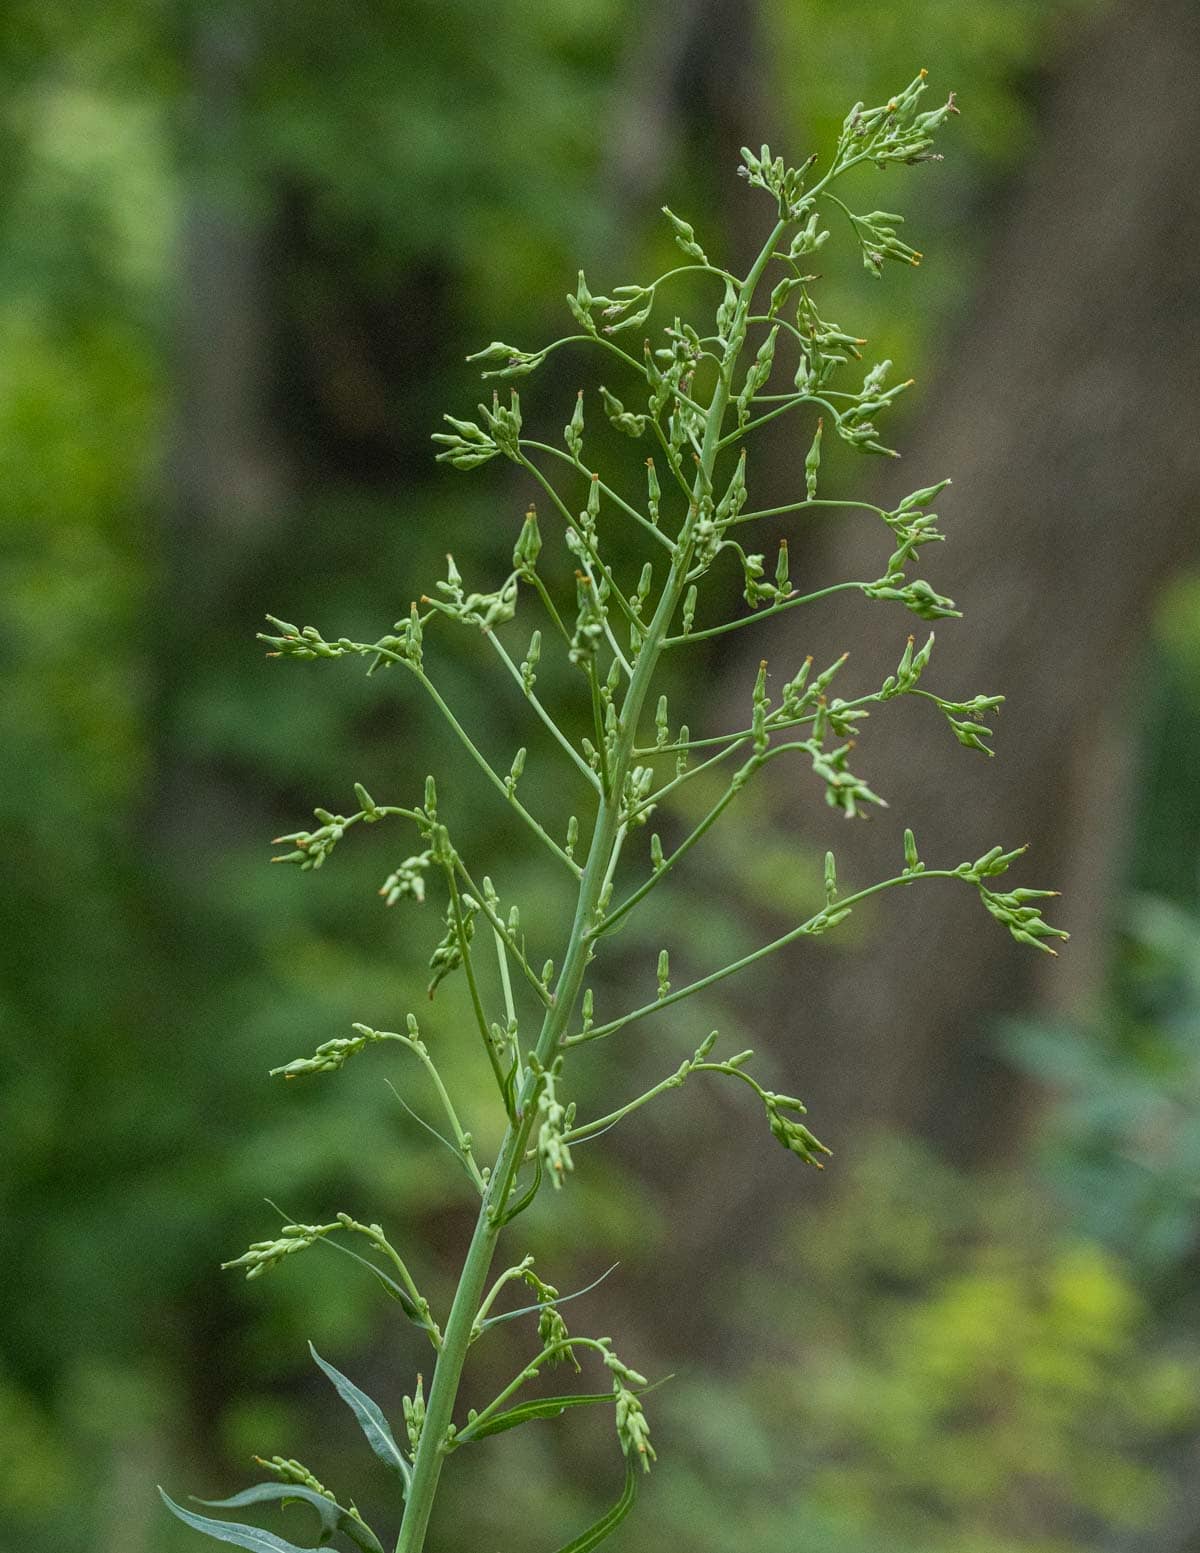 A fully branched out panicle of Canadian wild lettuce (L. canadensis).